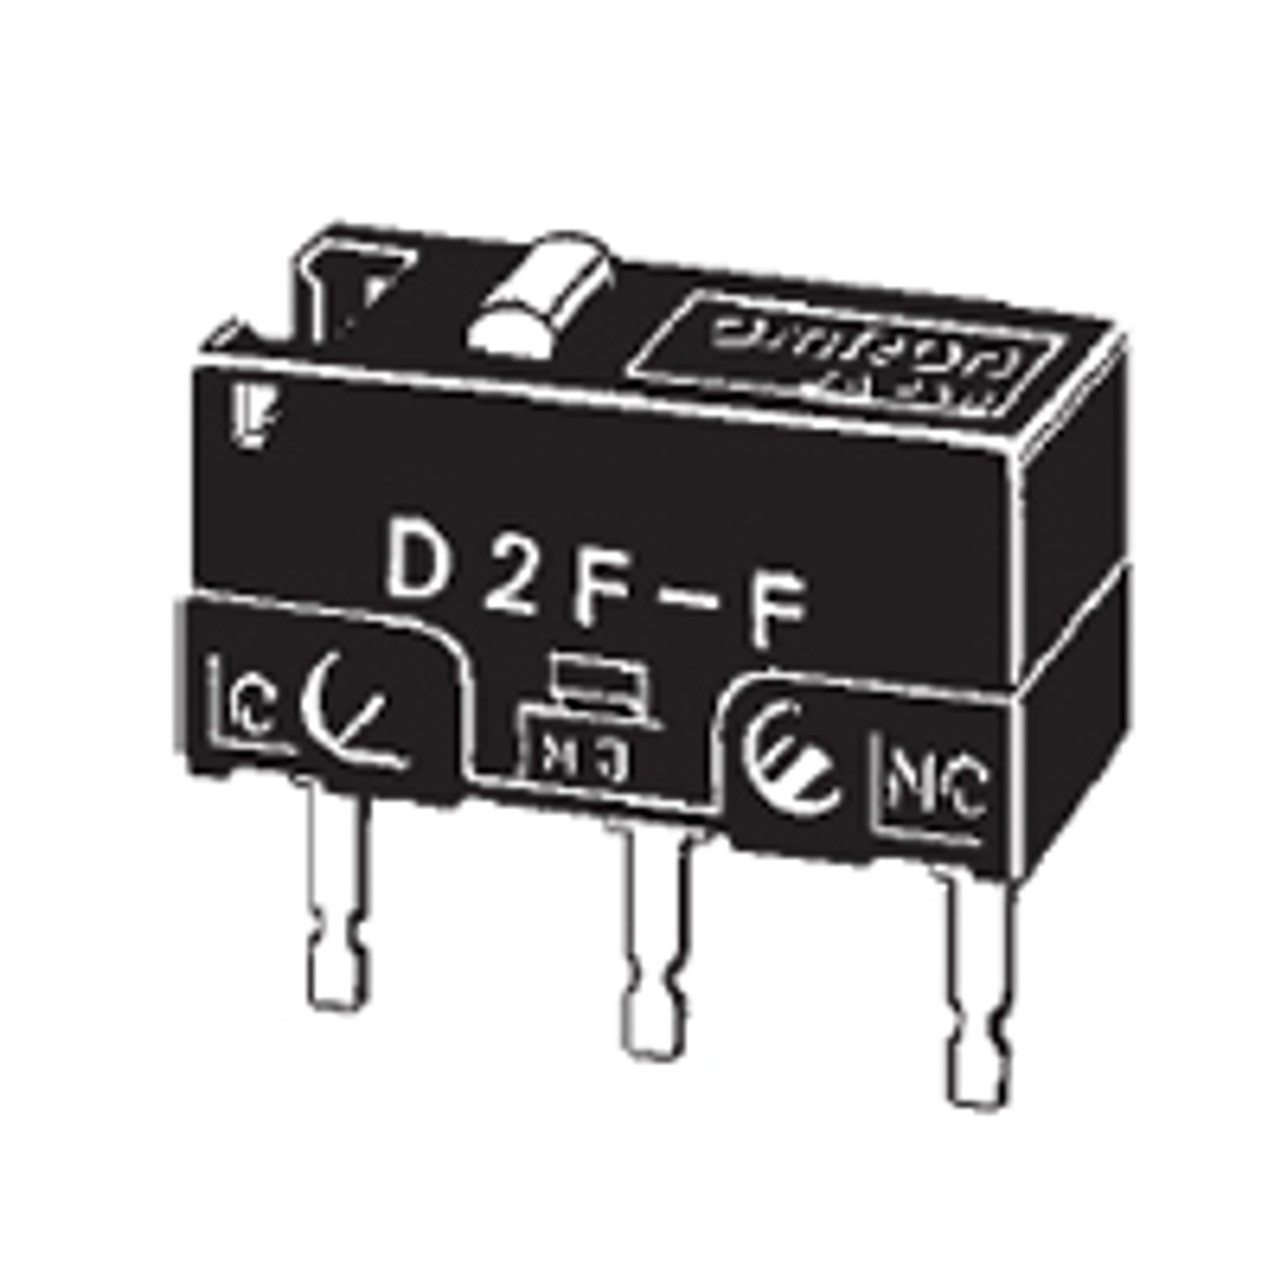 Omron D2F-D3 Snap-Action Switches